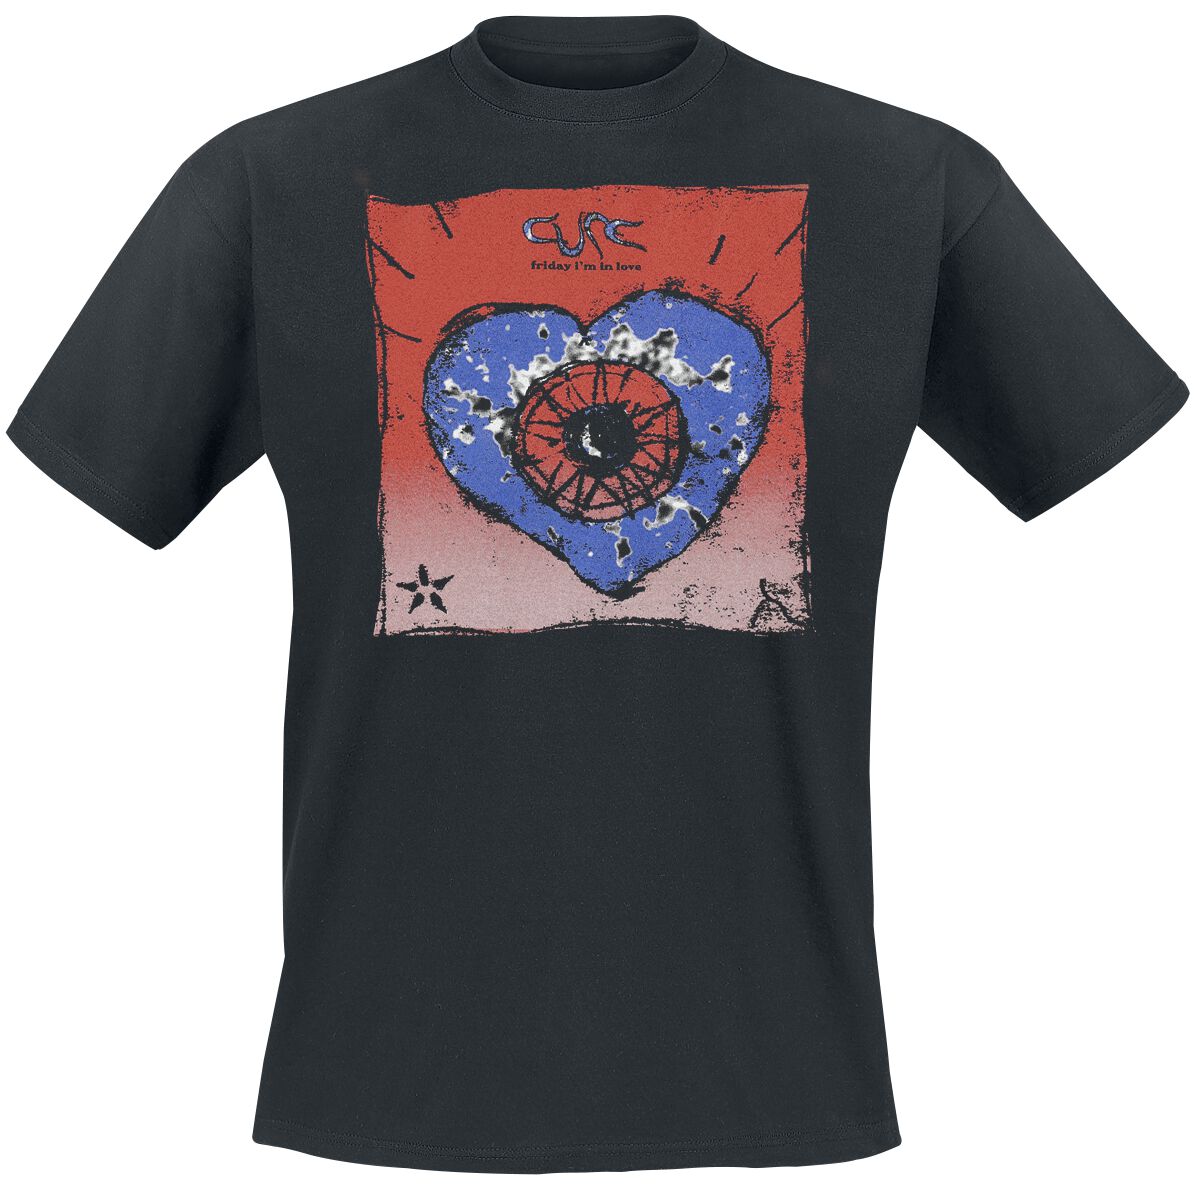 The Cure - Friday I'm In Love - T-Shirt - Uomo - nero